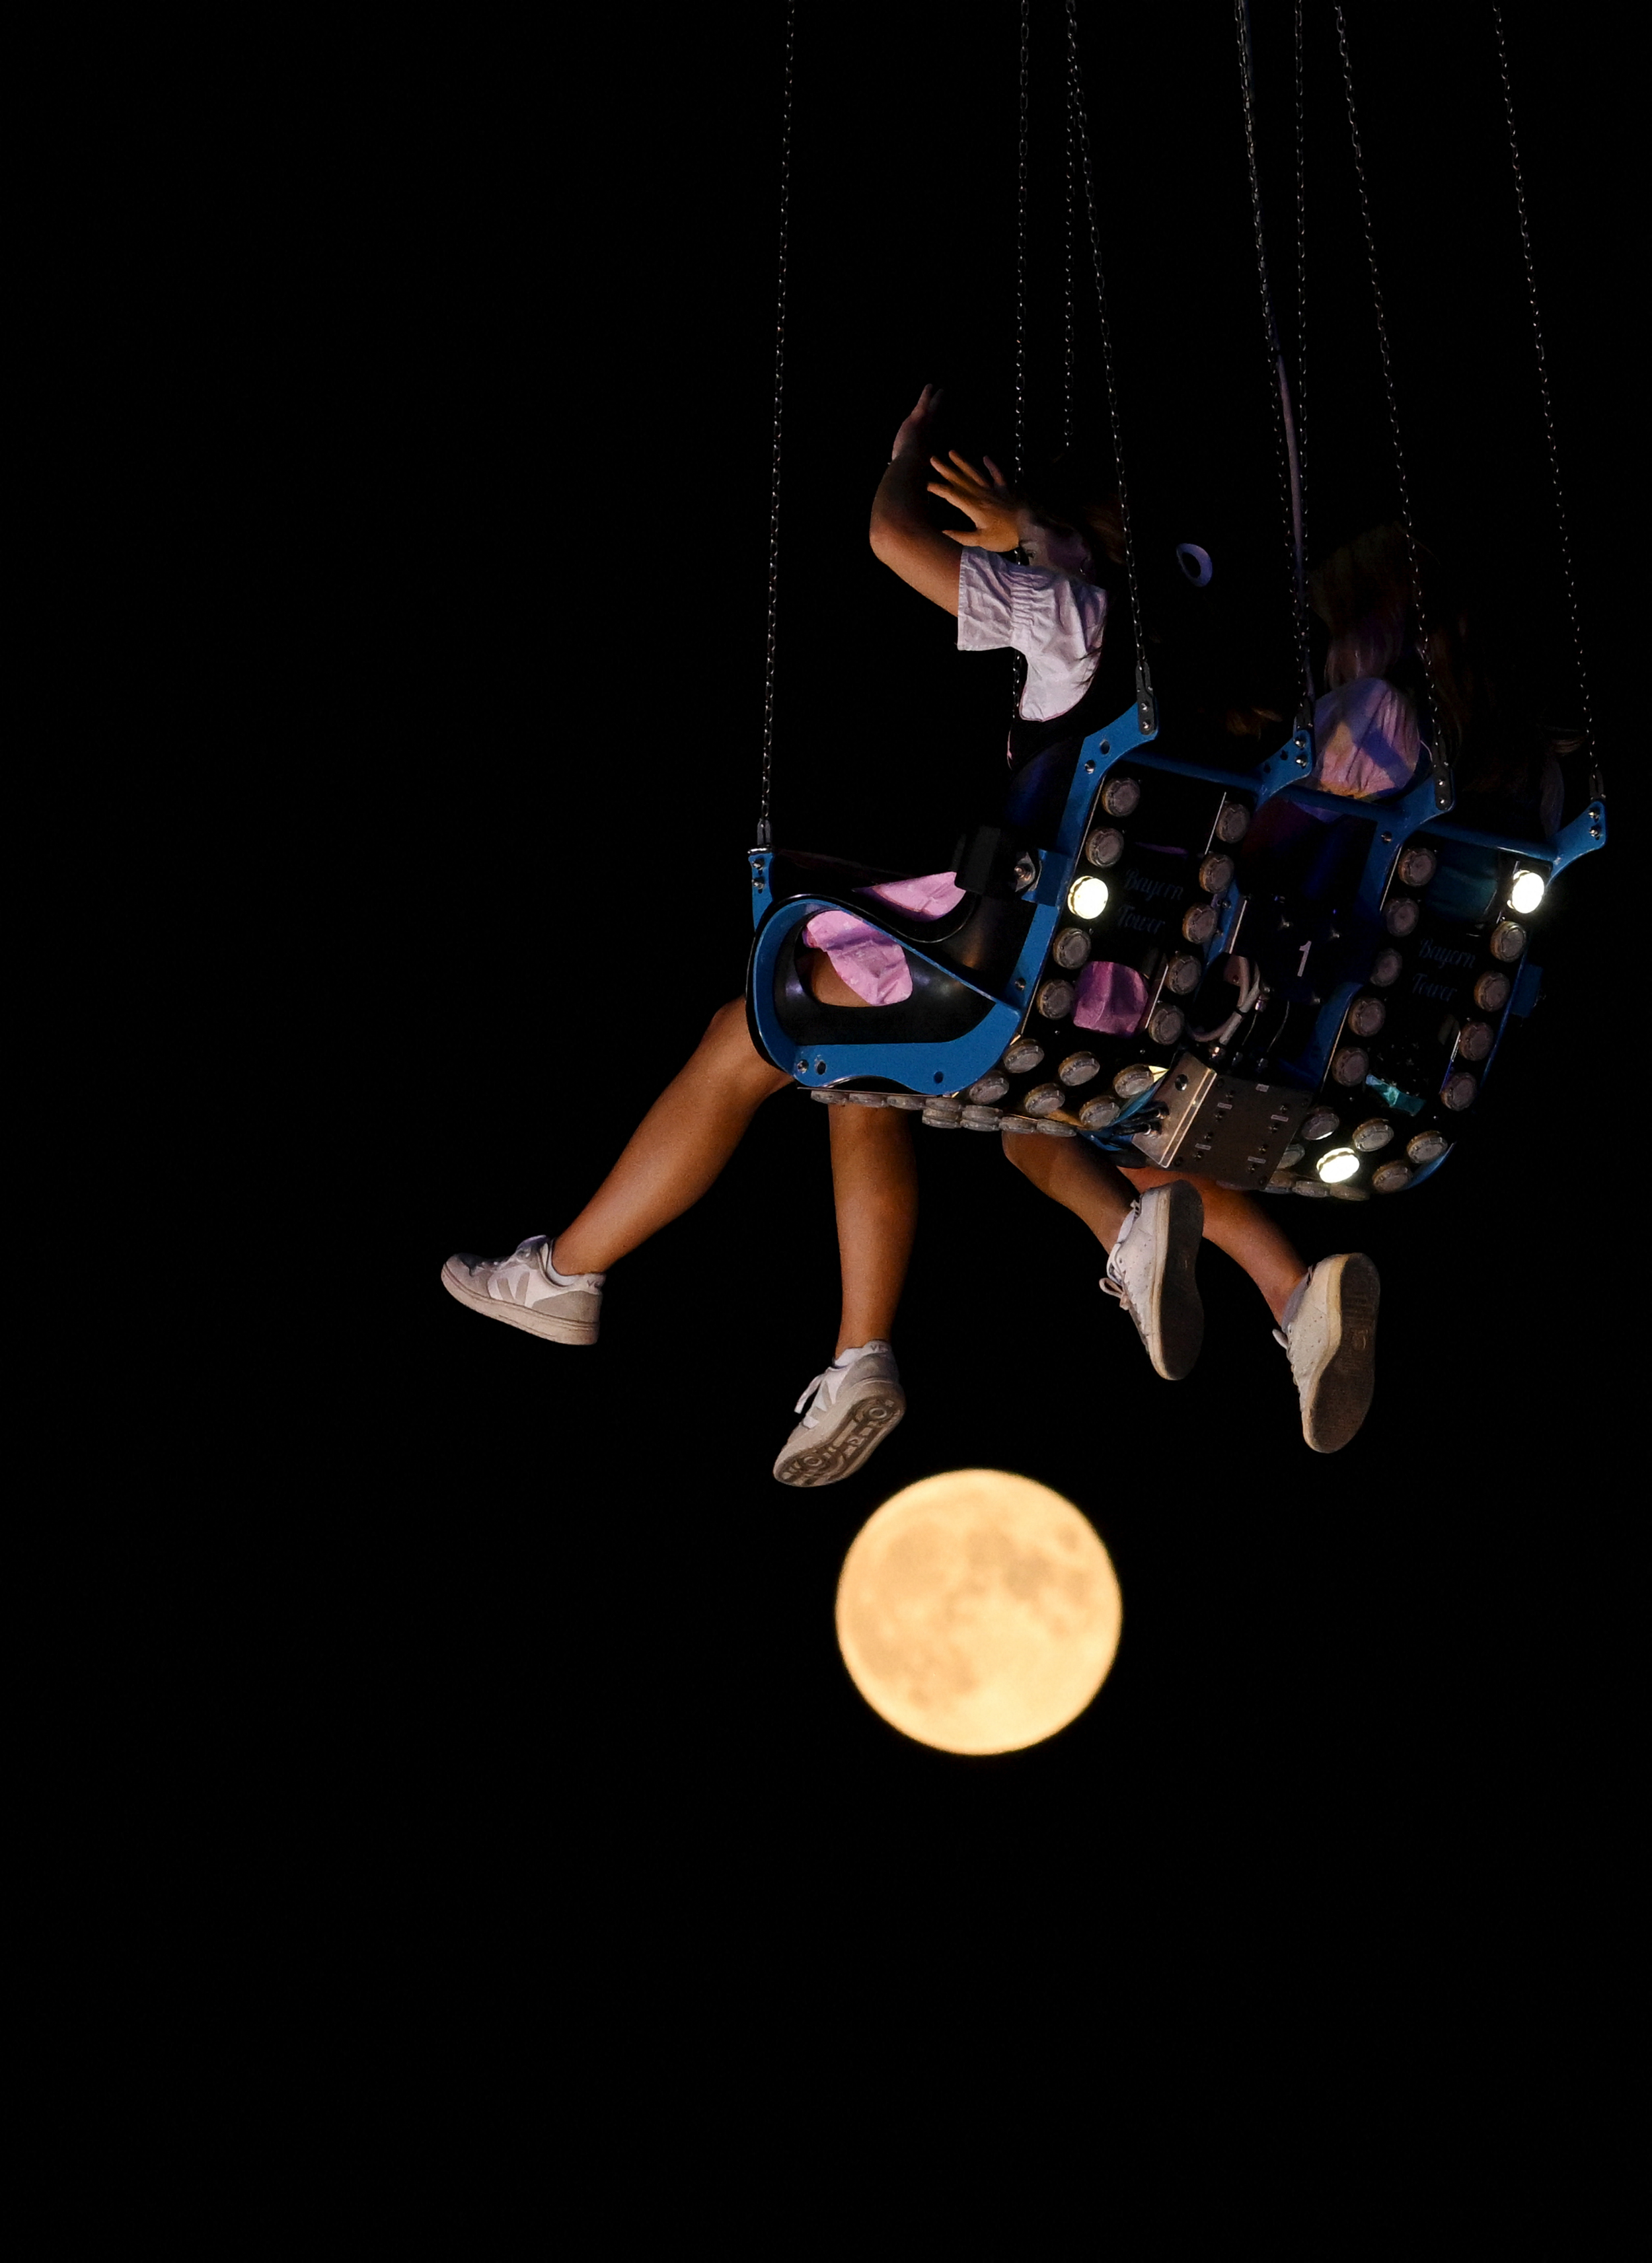 The moon in seen in the background as visitors enjoy their ride in a carousel car